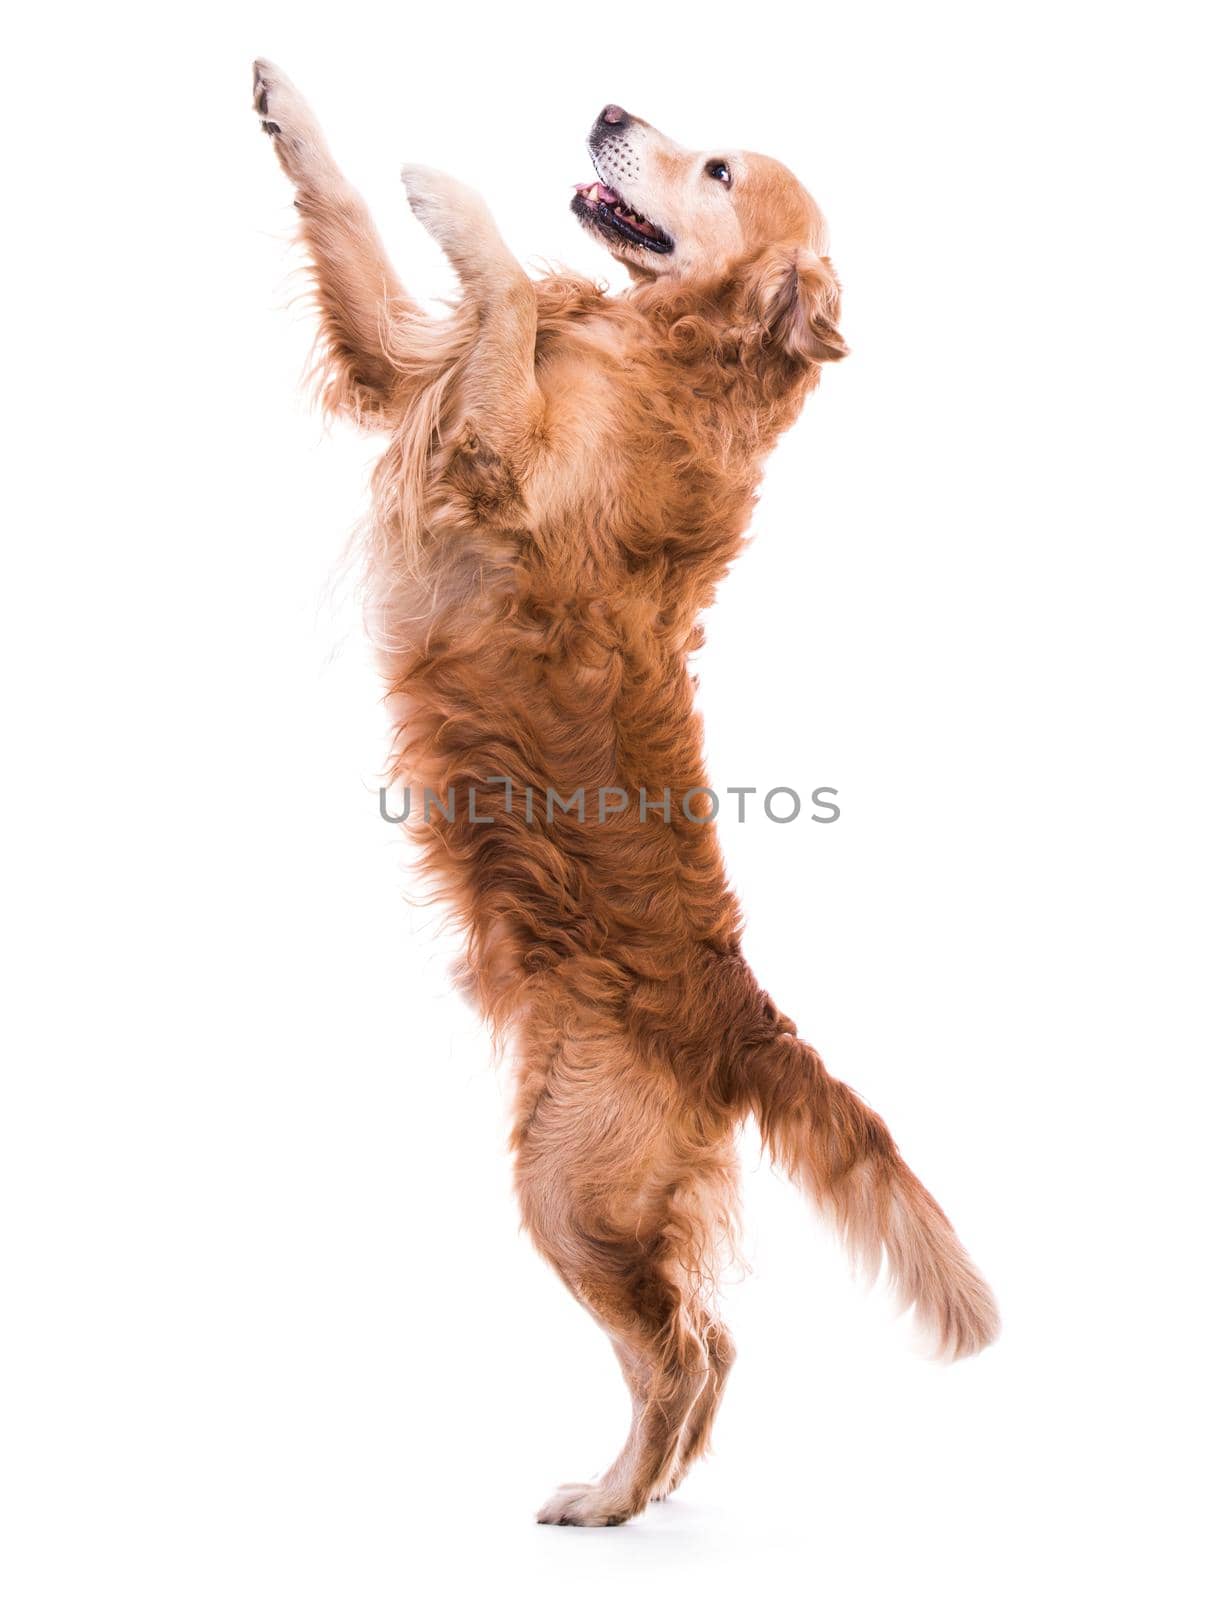 Cute dog jumping - isolated over a white backgorund by tan4ikk1